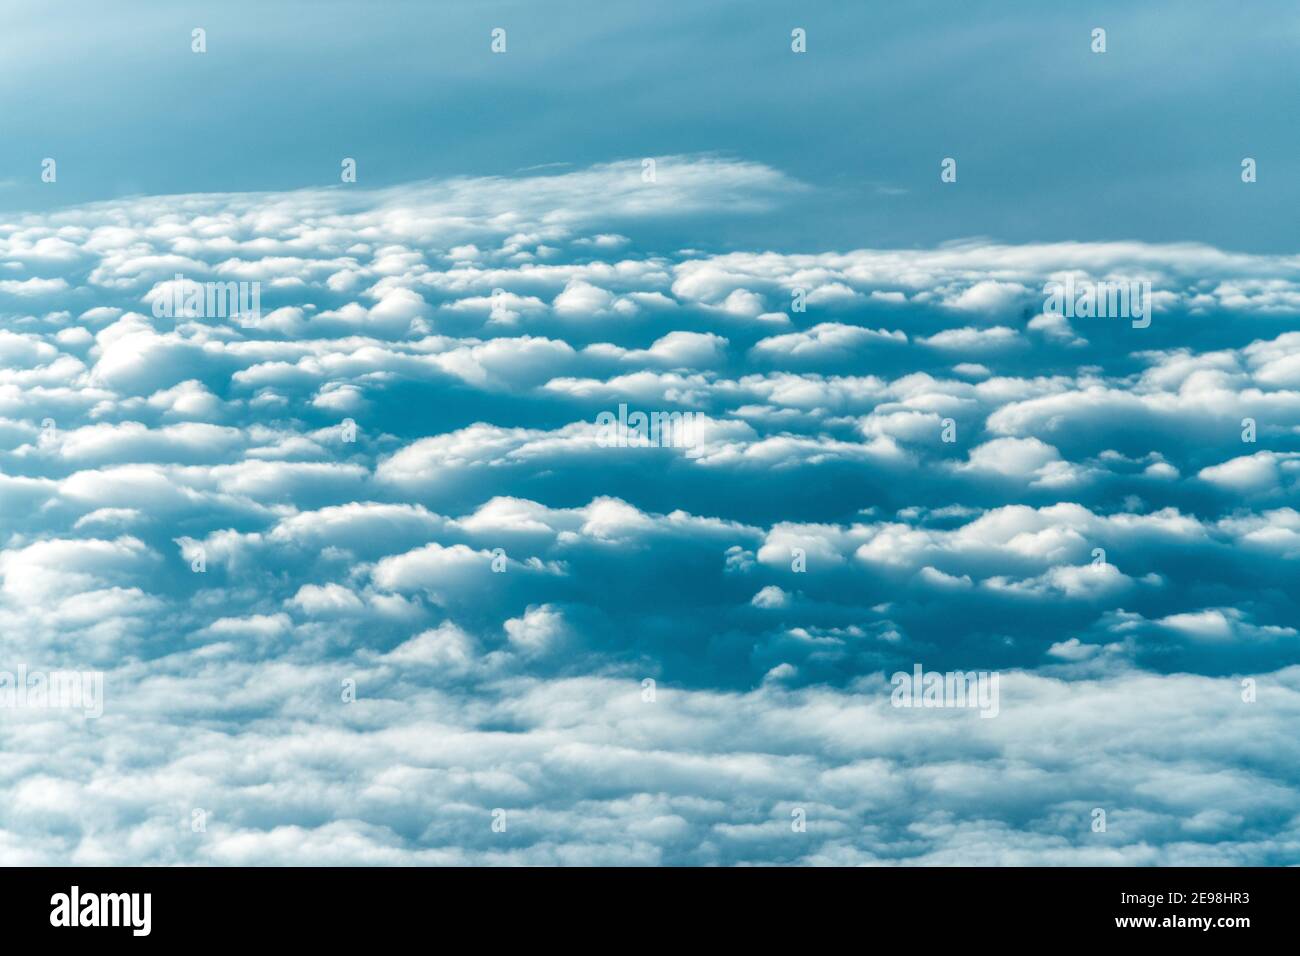 Pattern of clouds seen from a high angle view. Toned image Stock Photo